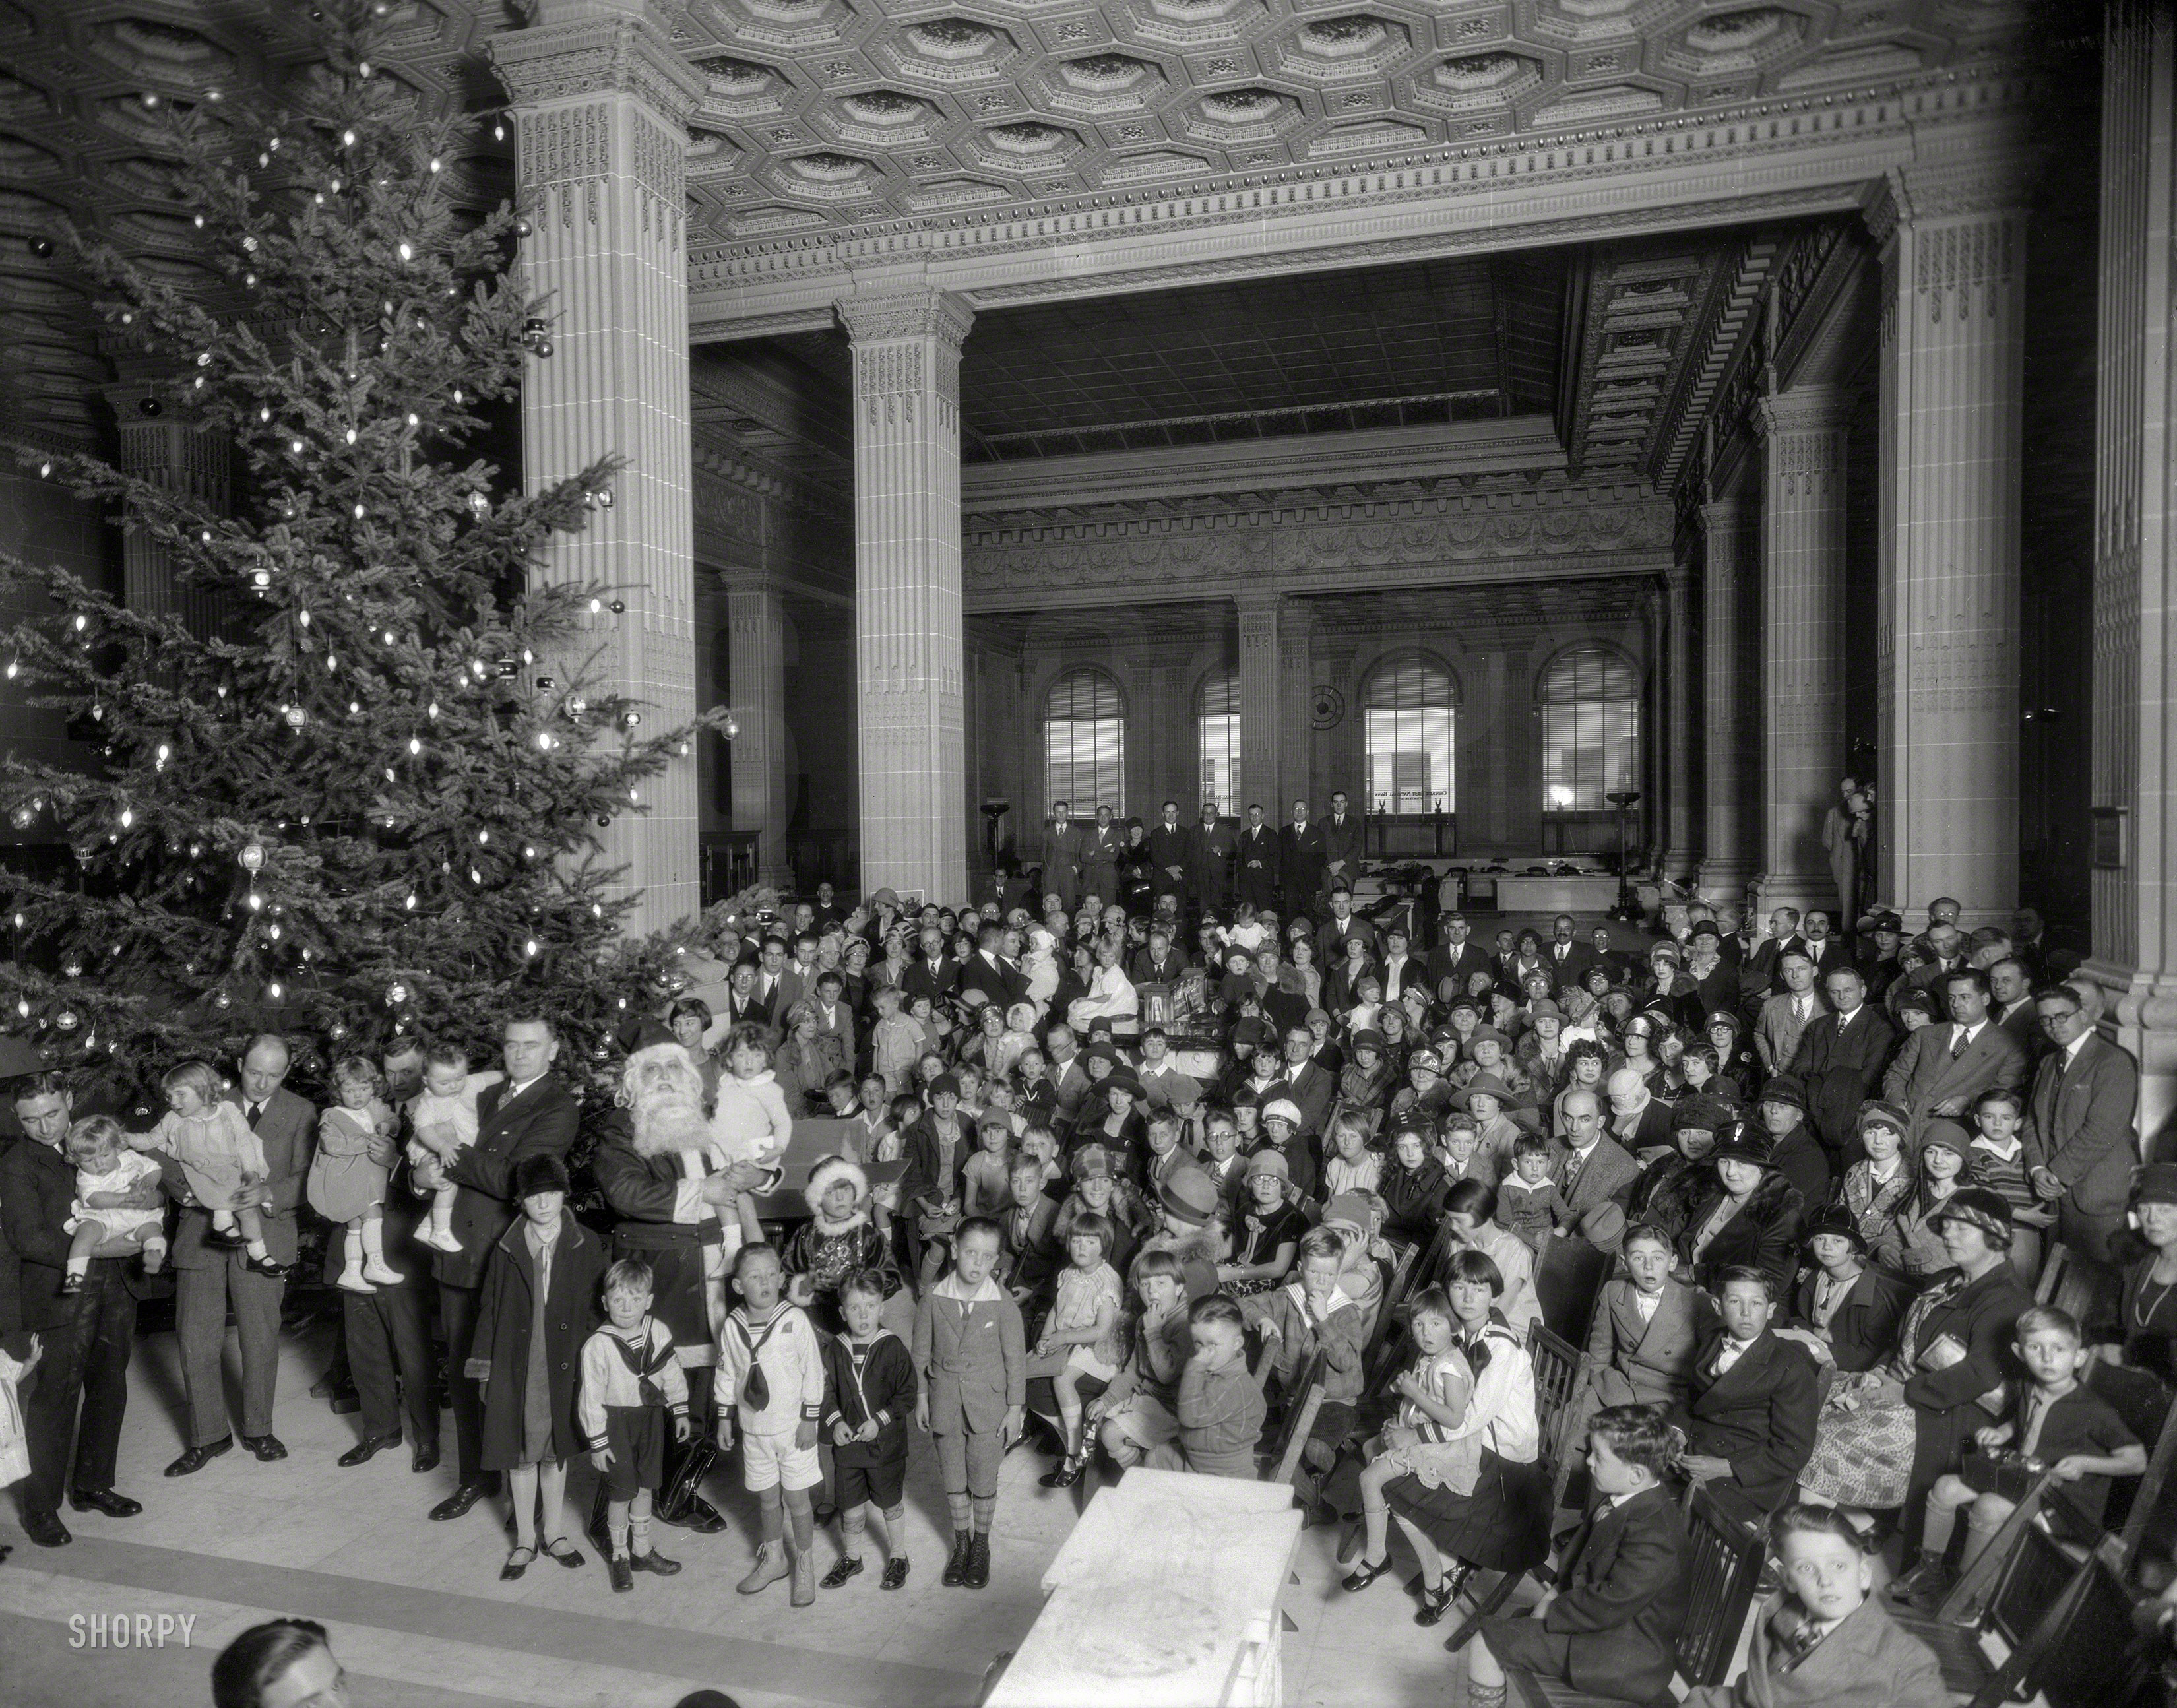 &nbsp; &nbsp; &nbsp; &nbsp; Before getting to all those department stores, Santa has to hit the bank. Leave your checkbook at home, but bring the kids!
December 1925. "Christmas tree and Santa Claus at Crocker National Bank, Post & Montgomery Streets, San Francisco." 8x10 nitrate negative, formerly of the Wyland Stanley and Marilyn Blaisdell collections. View full size.